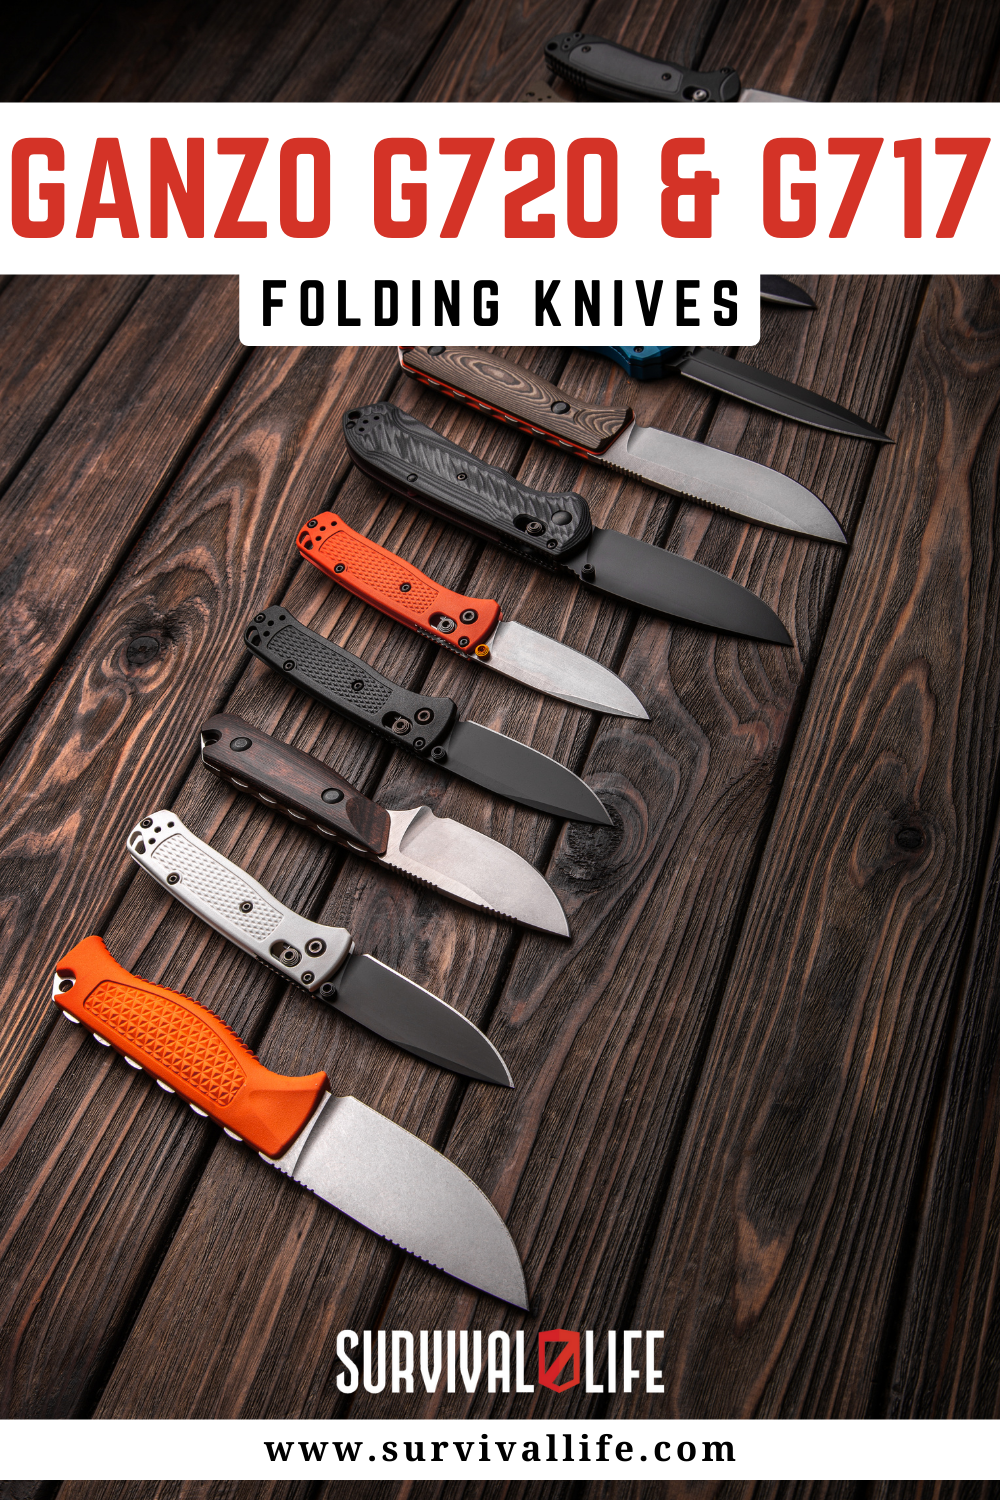 Ganzo G720 and G717 Folding Knives